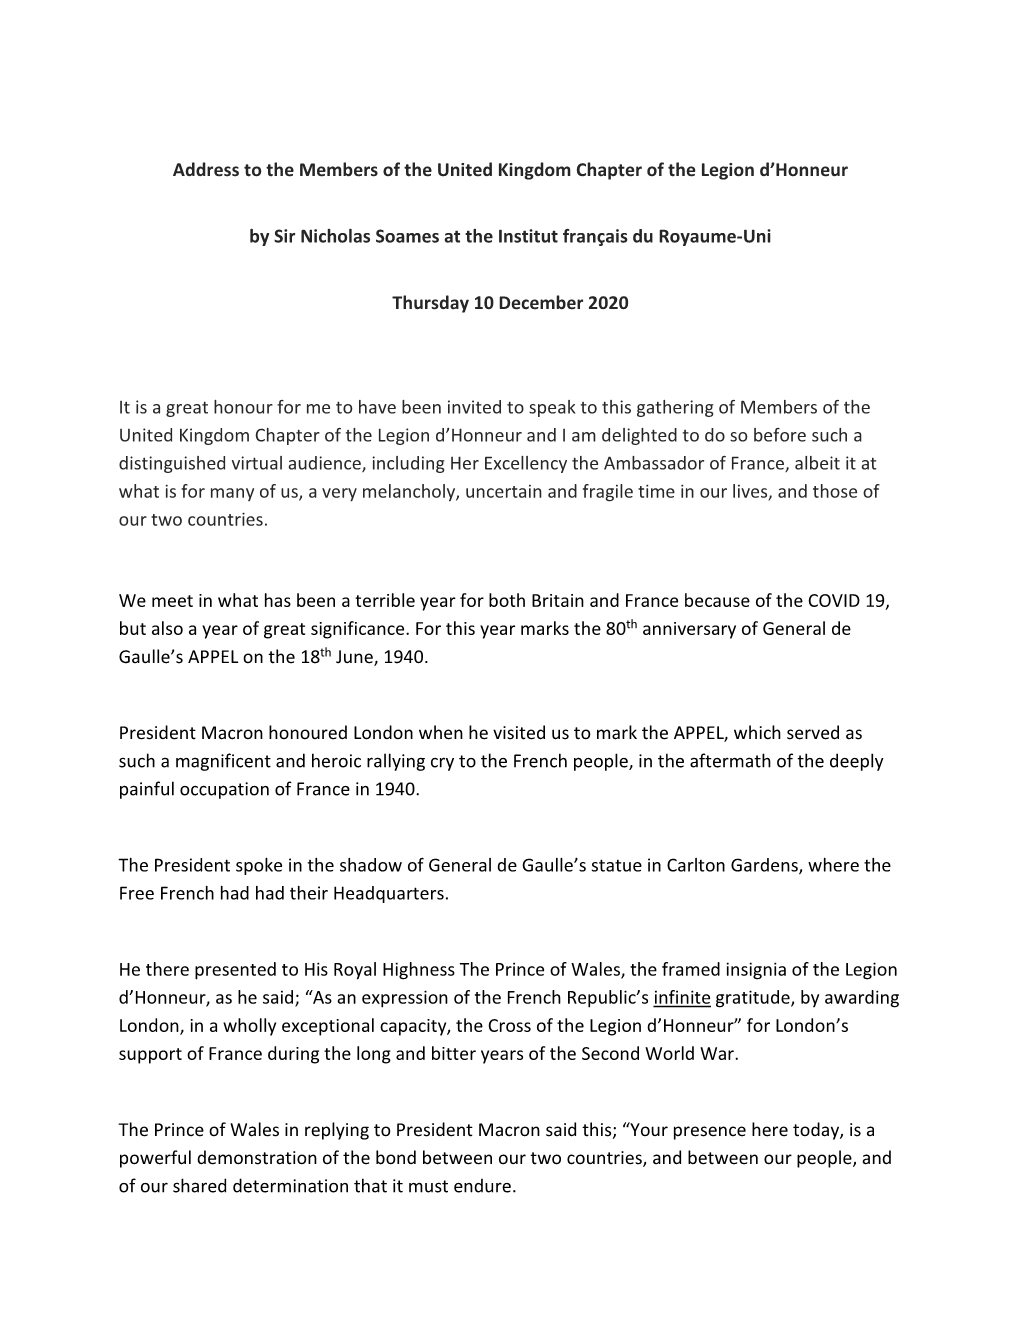 Address to the Members of the United Kingdom Chapter of the Legion D’Honneur